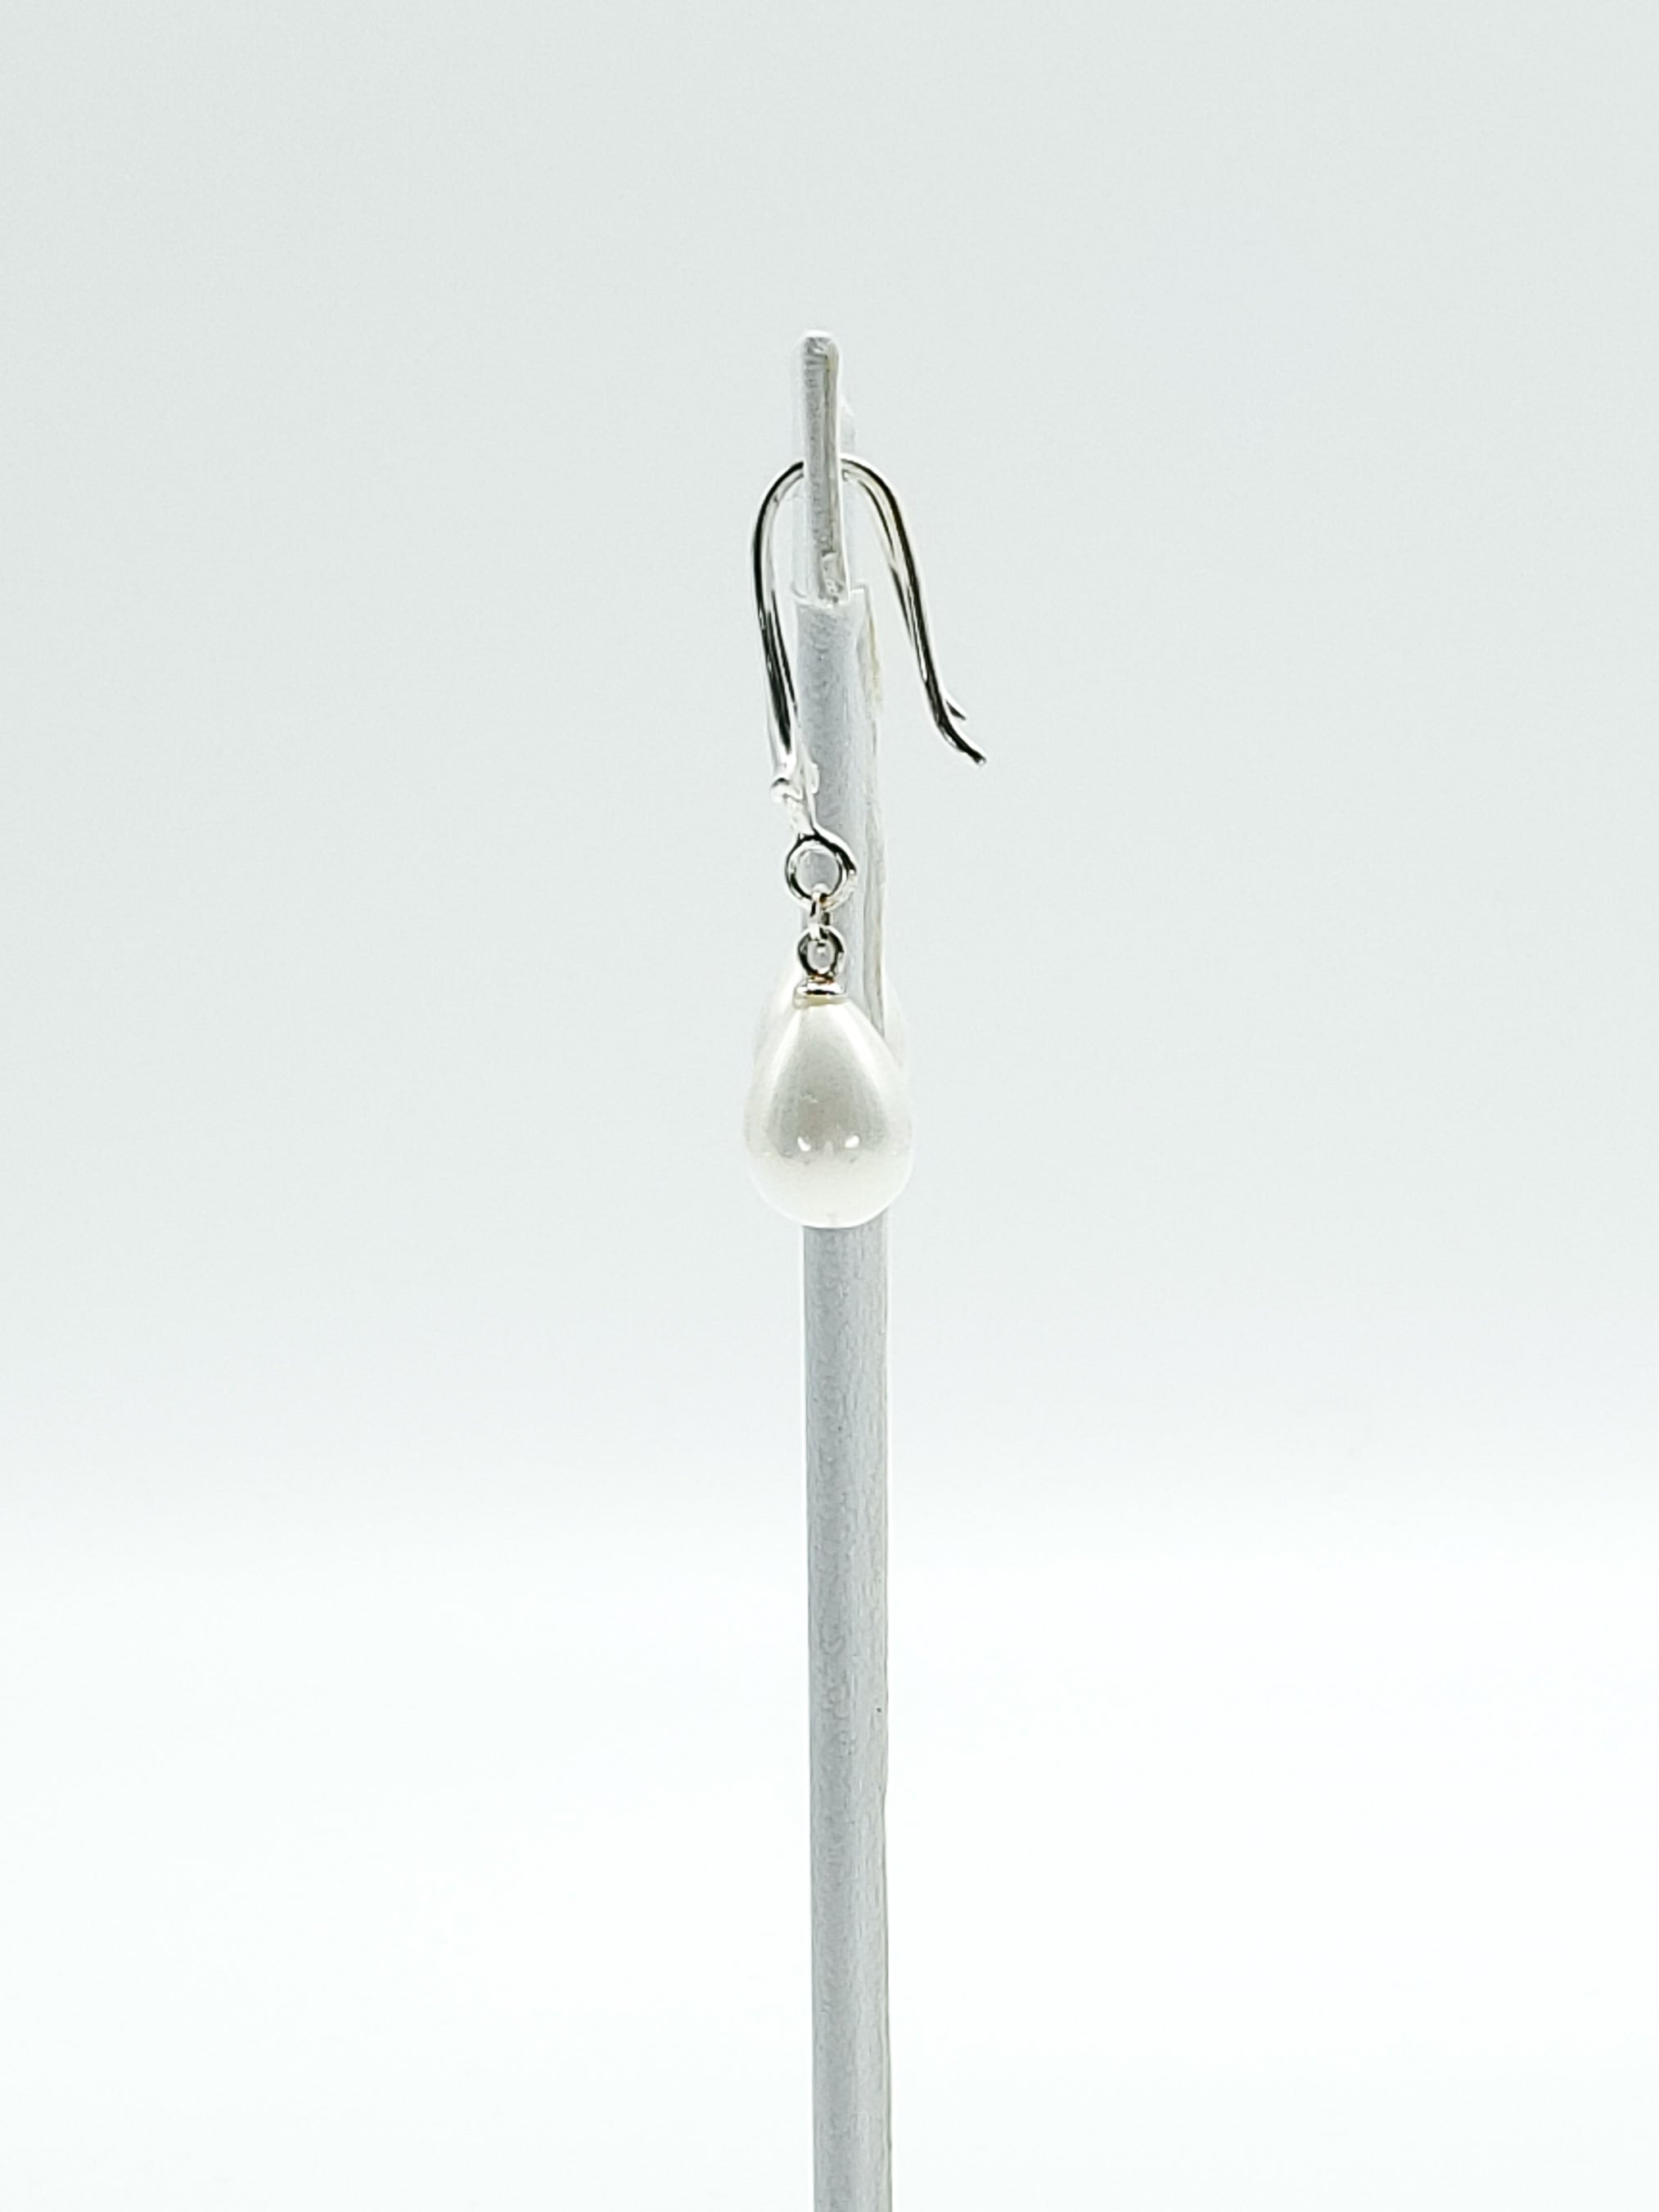 White Shell Pearl Earrings on Sterling Silver Lily Ear Wires and Bails - The Caffeinated Raven